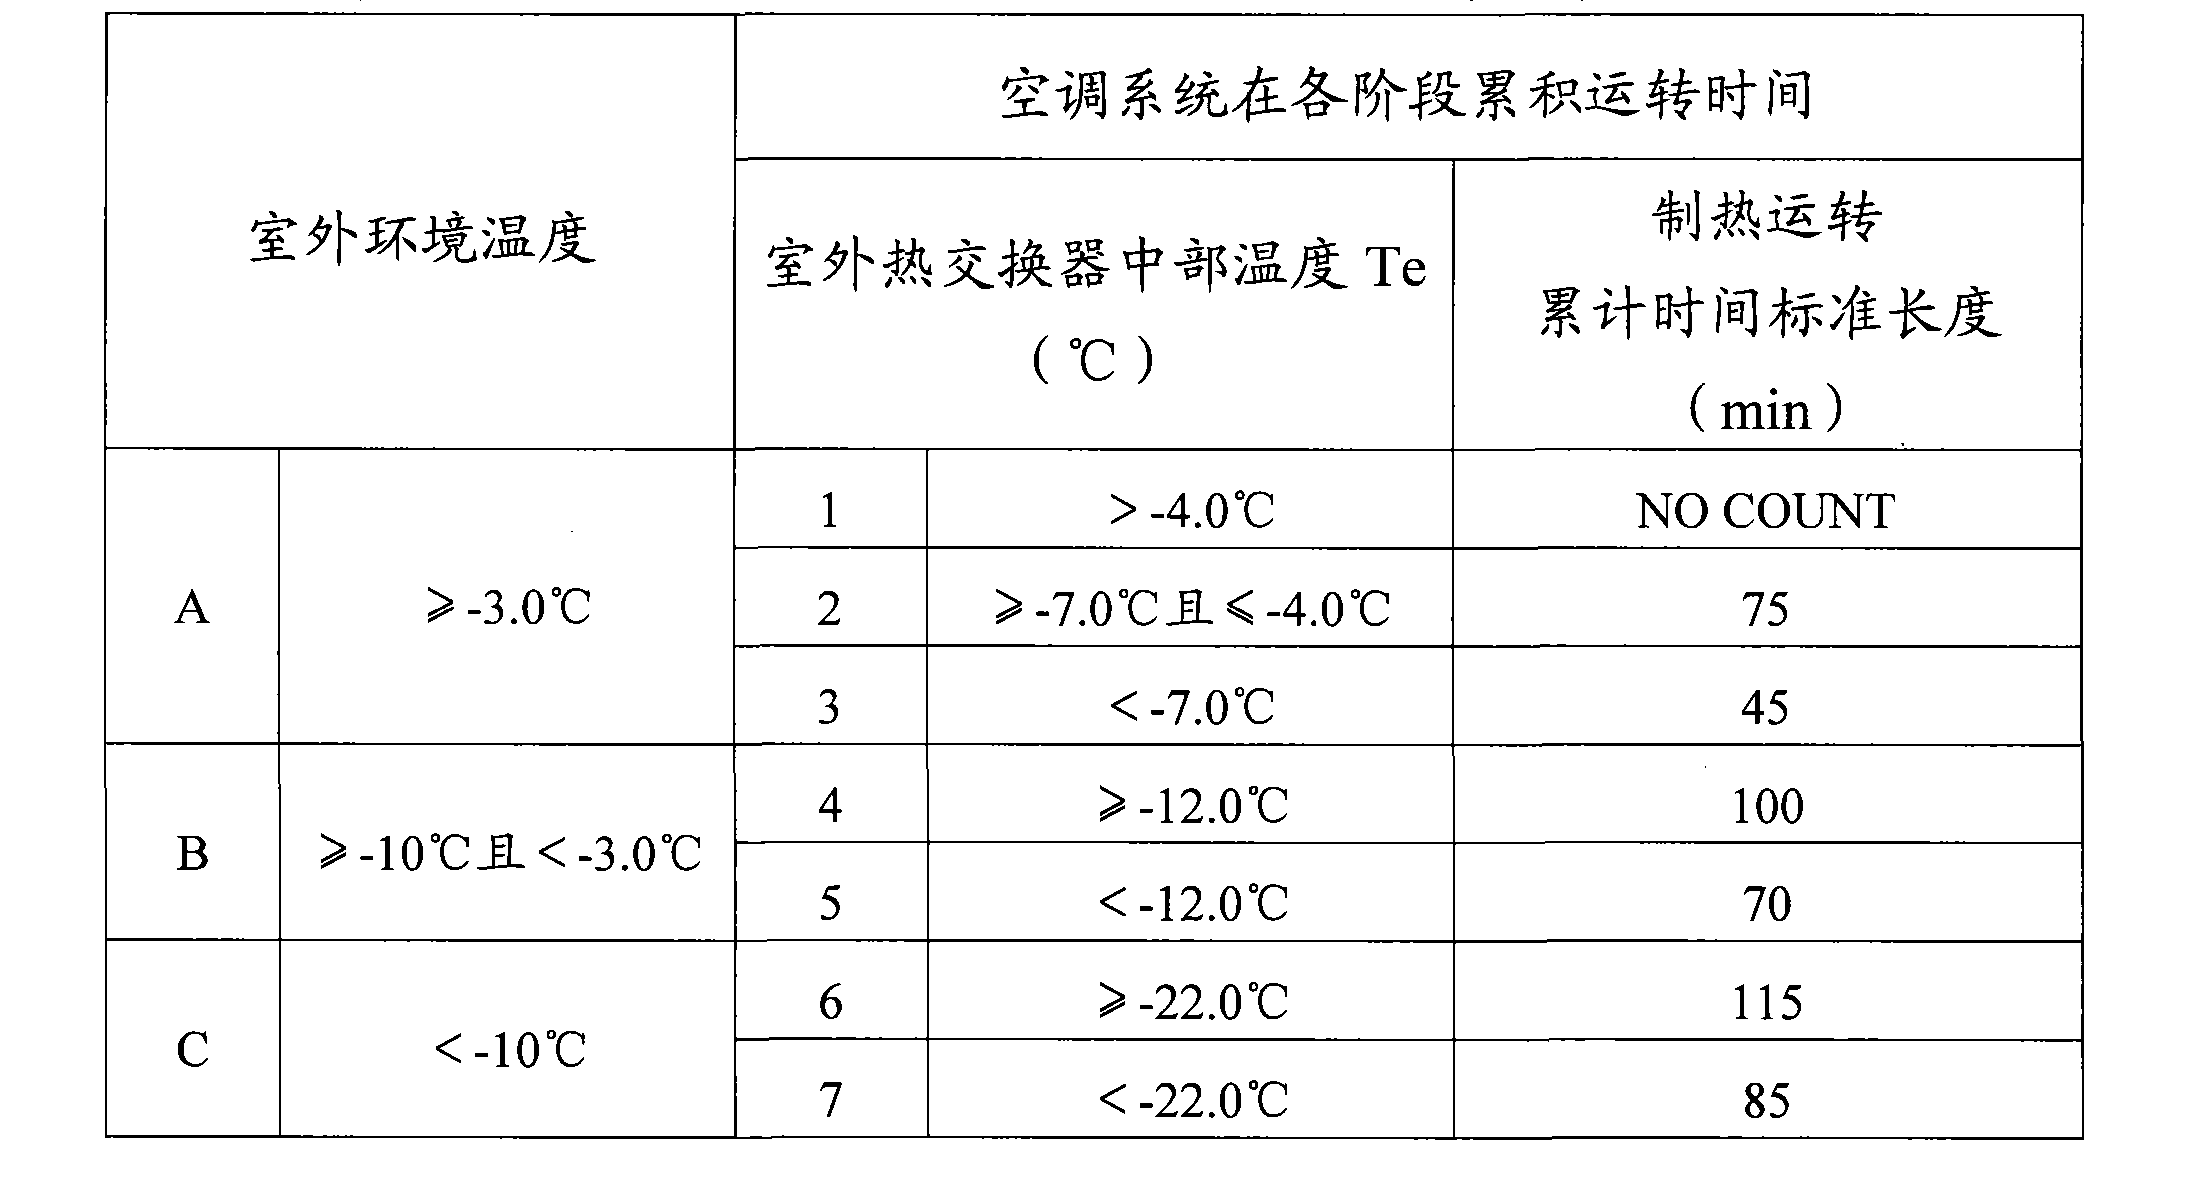 Defrosting control method for heat pump air conditioner